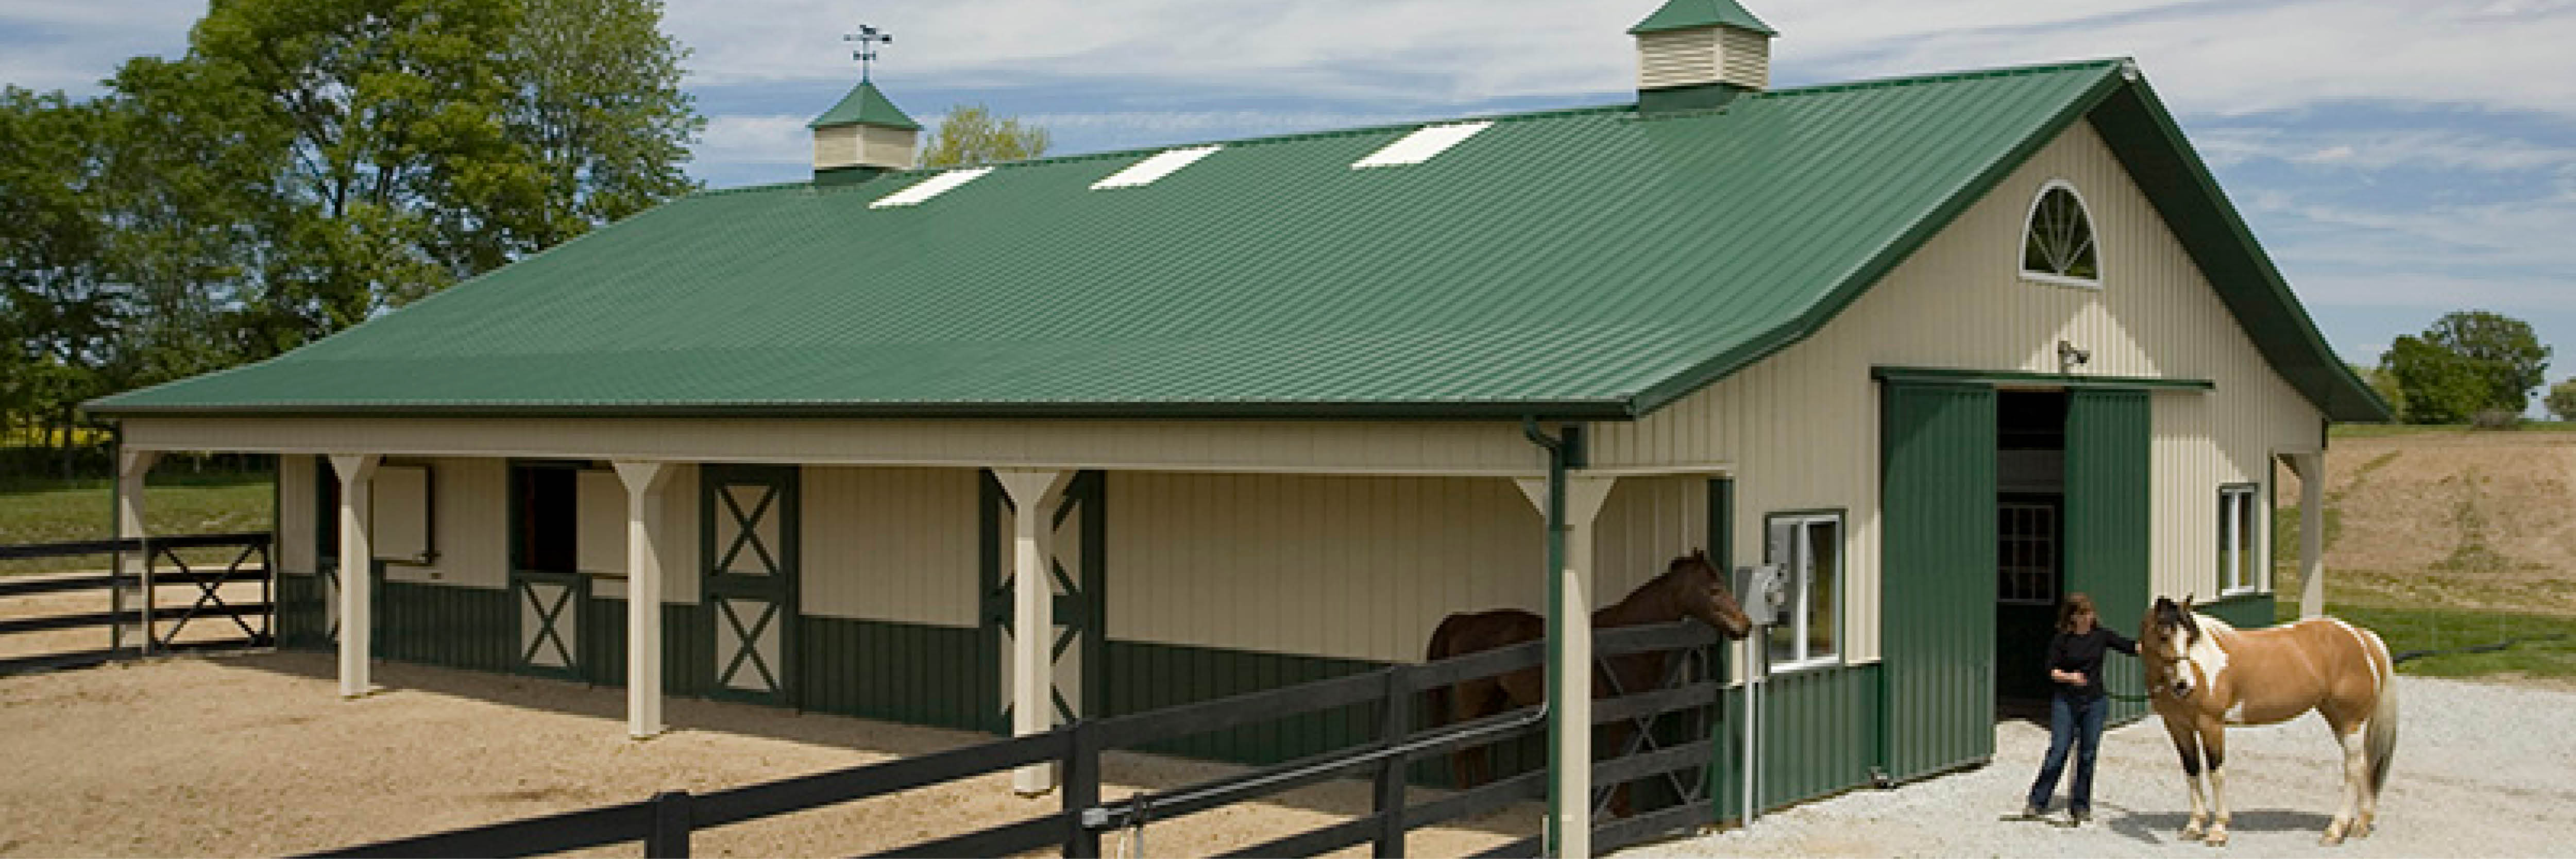 Who Builds Equine Pole Barns in Indiana?